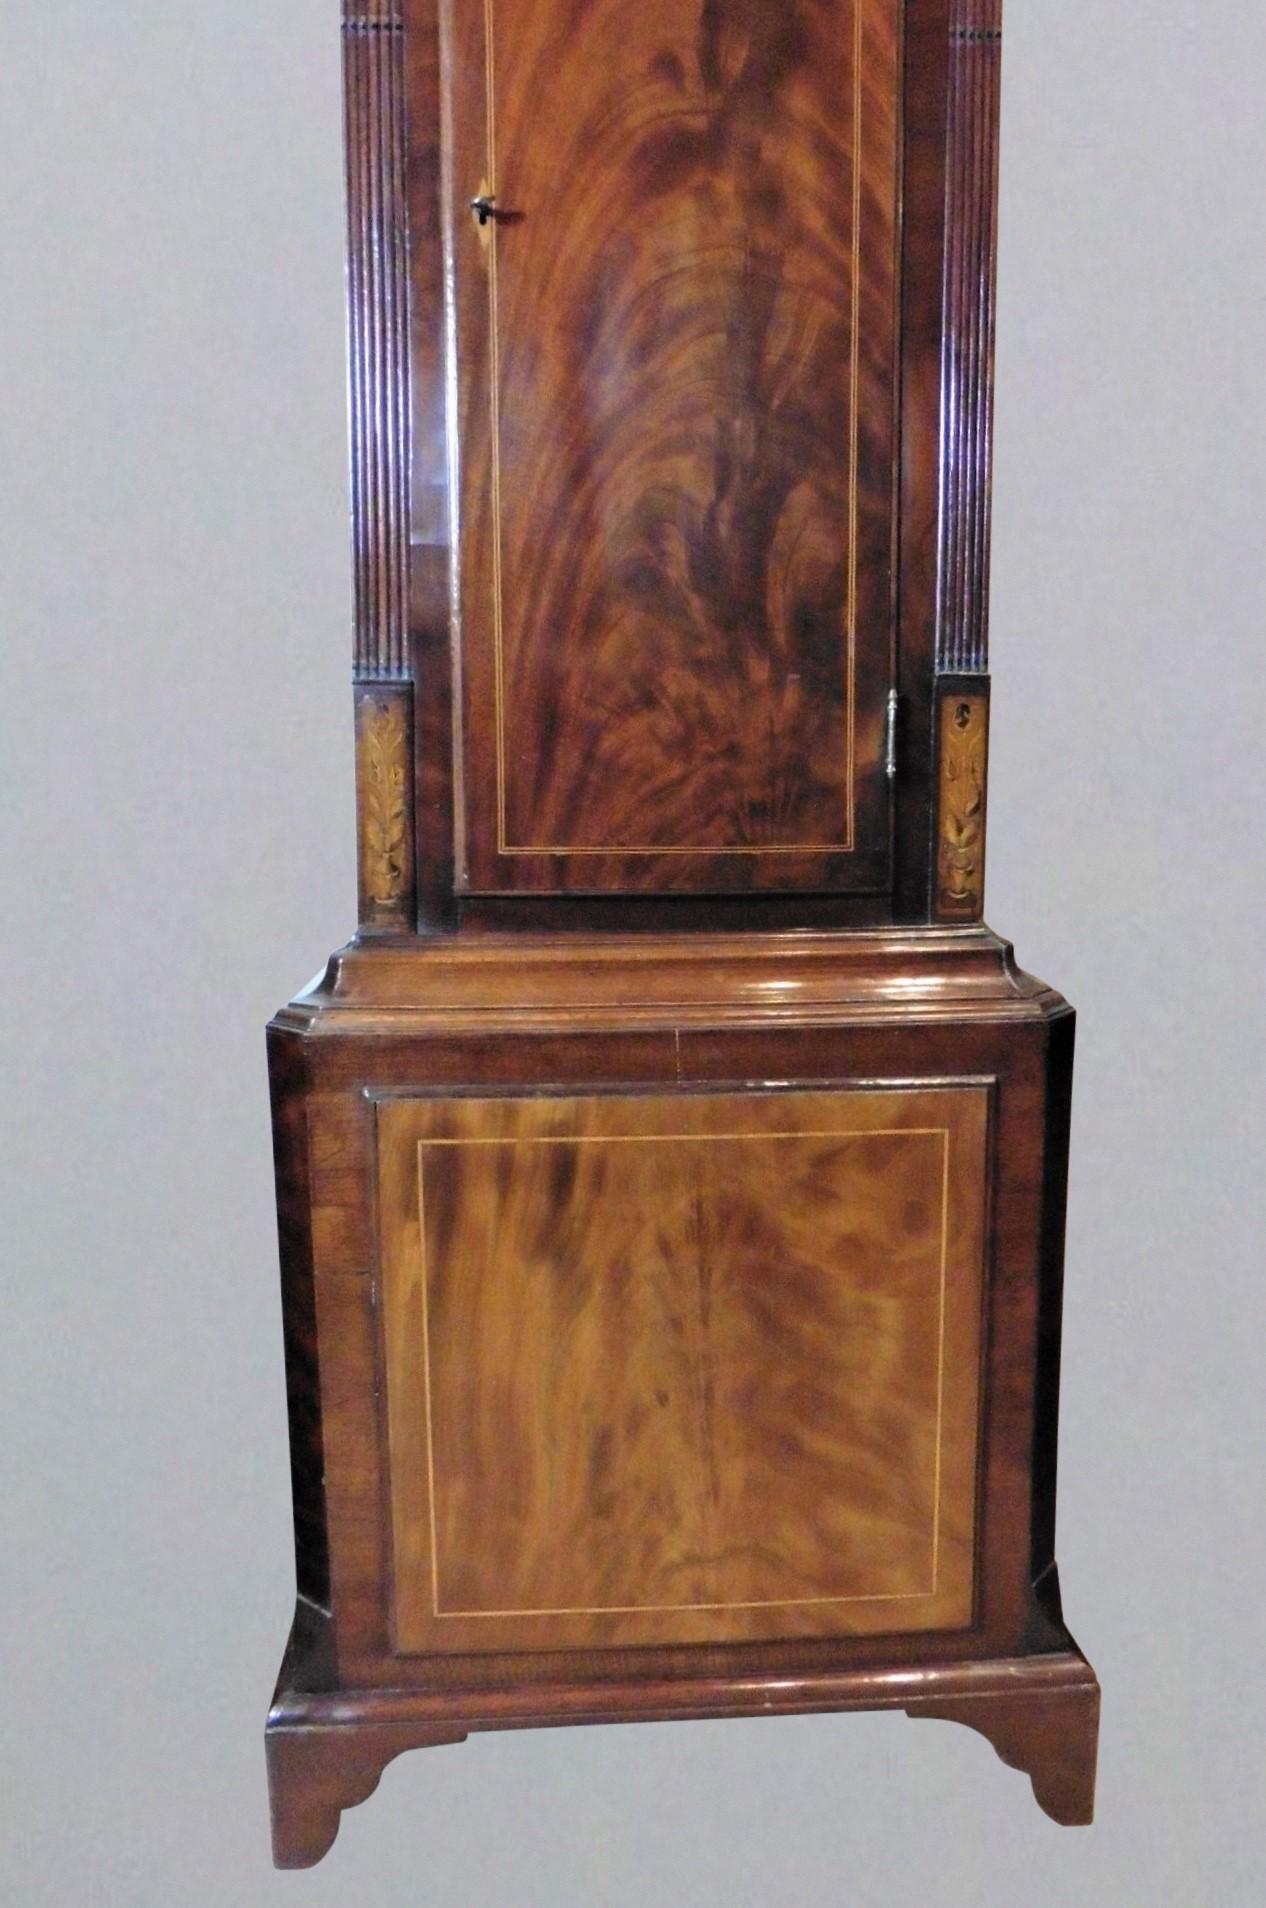 Mahogany Longcase Clock with Rocking Ship Automation. Robert Fletcher, Chester

Fine flame mahogany case, the hood with swan neck pediment, carved patrae, turned and reeded pillars with Corinthian capitals. Corner quadrants with inlaid shell